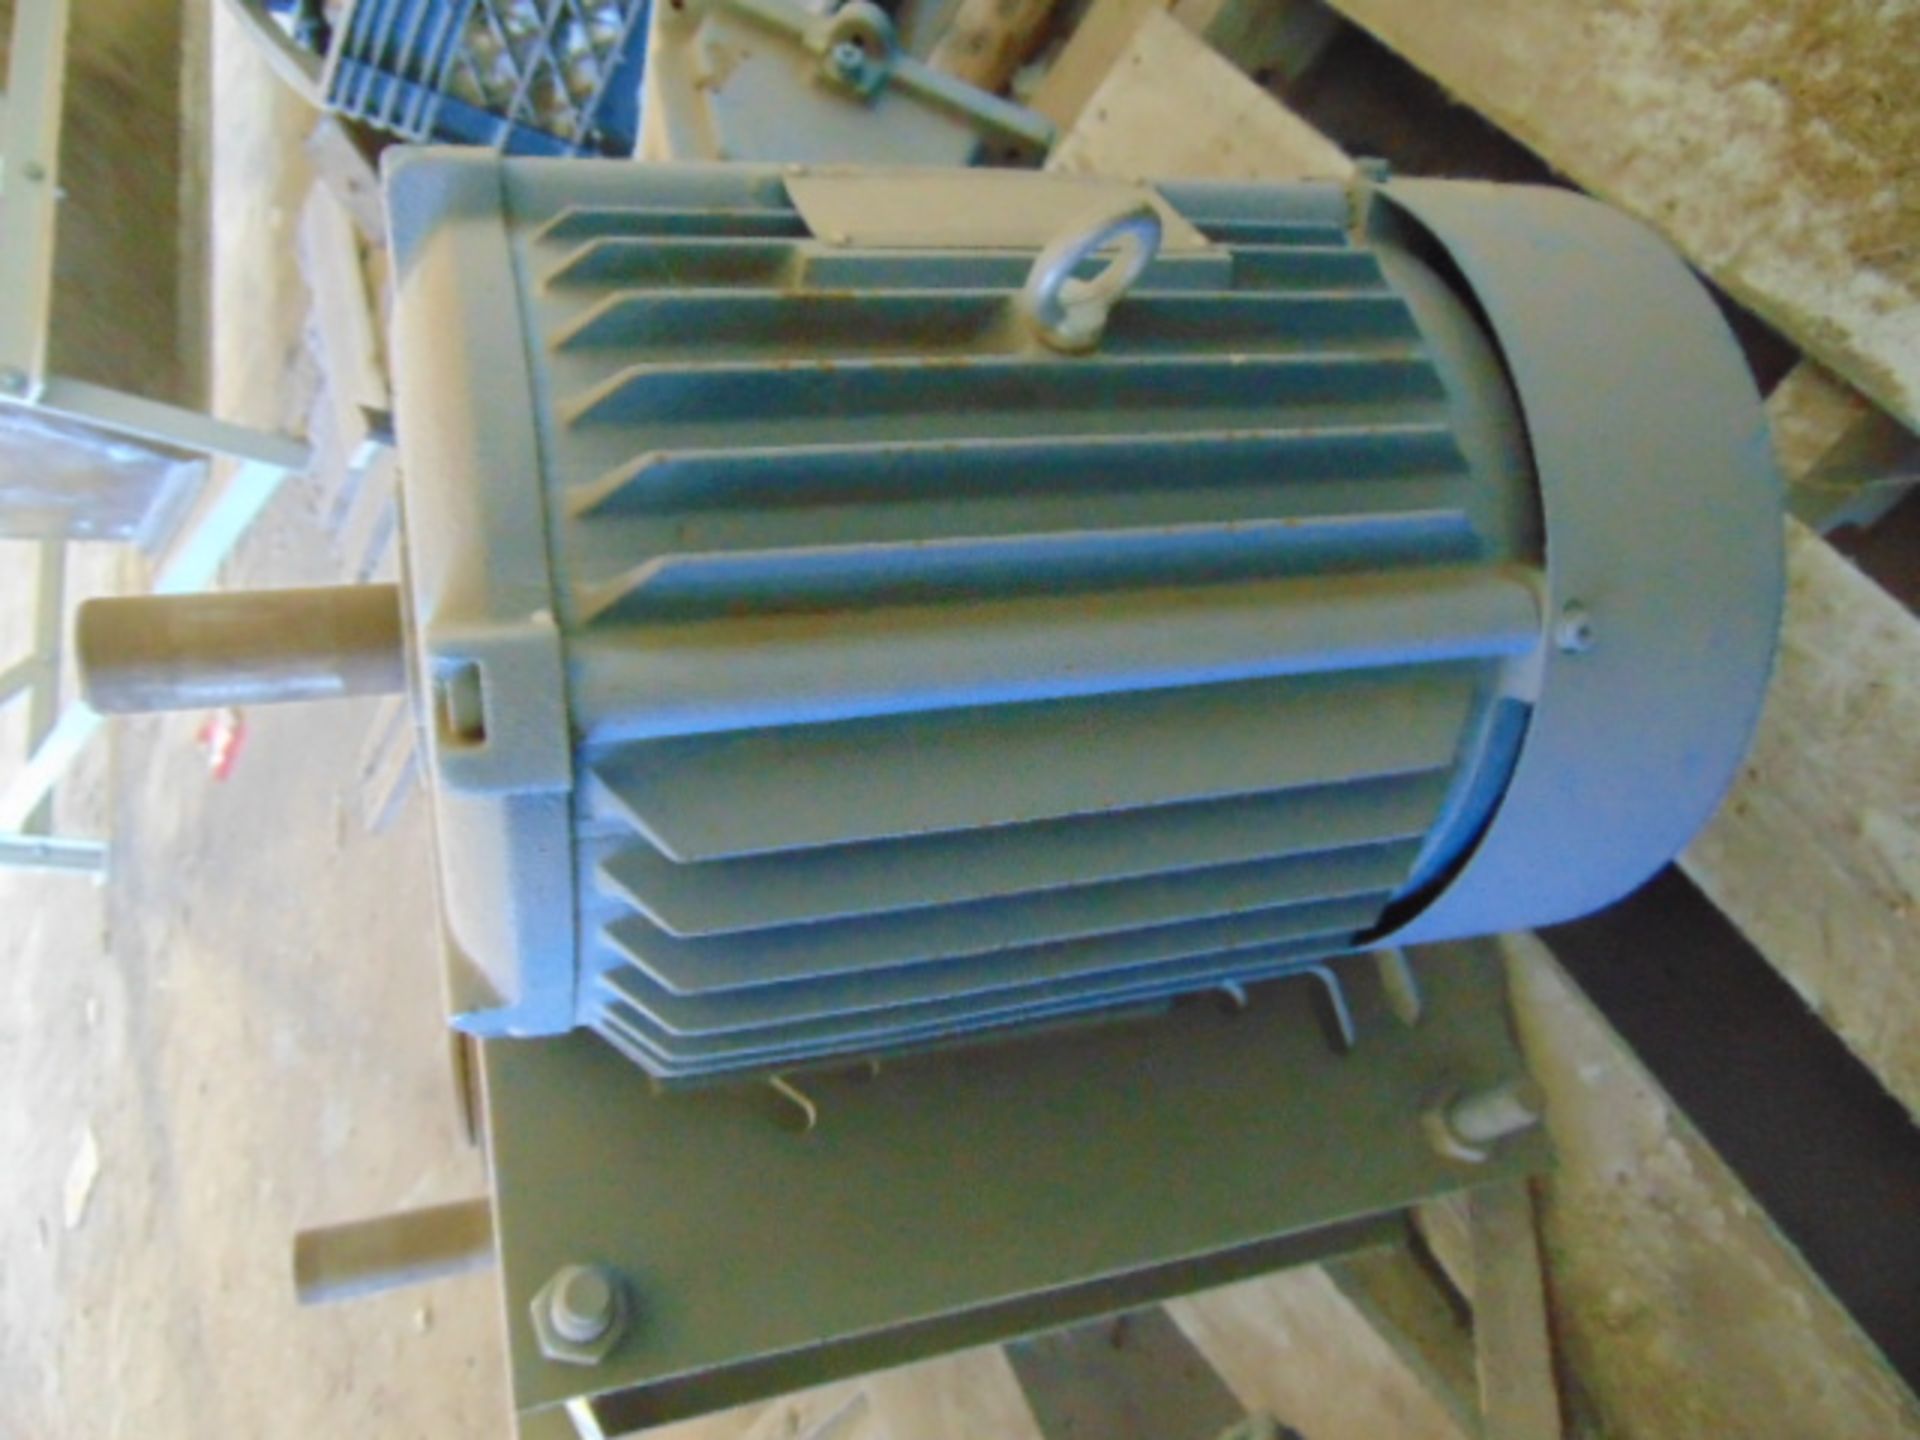 LOT CONSISTING OF: 10 HP electric motor & reducer (Located at: 116 Pine St., Hereford, TX 79045) - Image 2 of 4